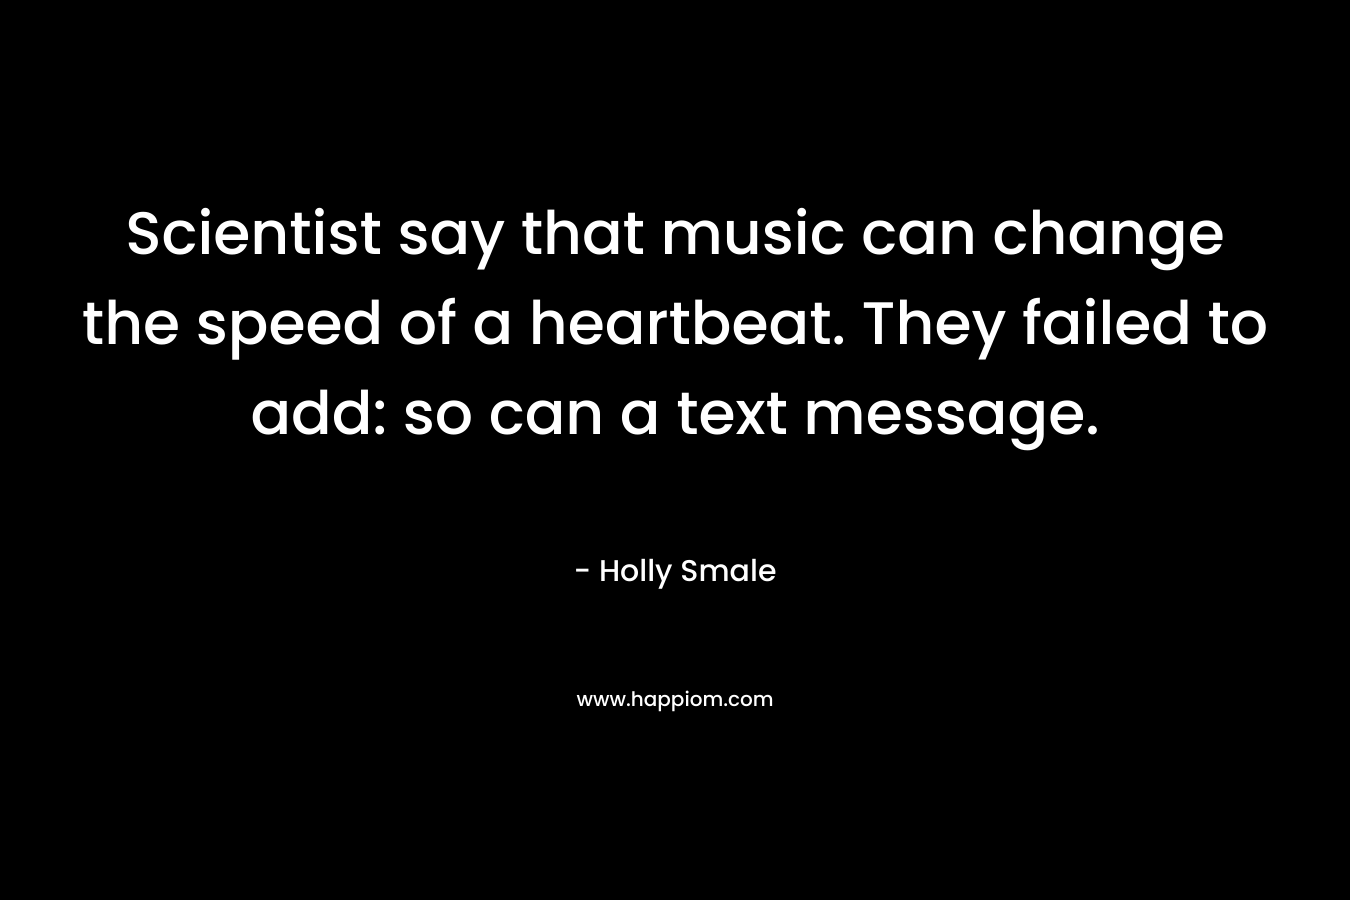 Scientist say that music can change the speed of a heartbeat. They failed to add: so can a text message. – Holly Smale